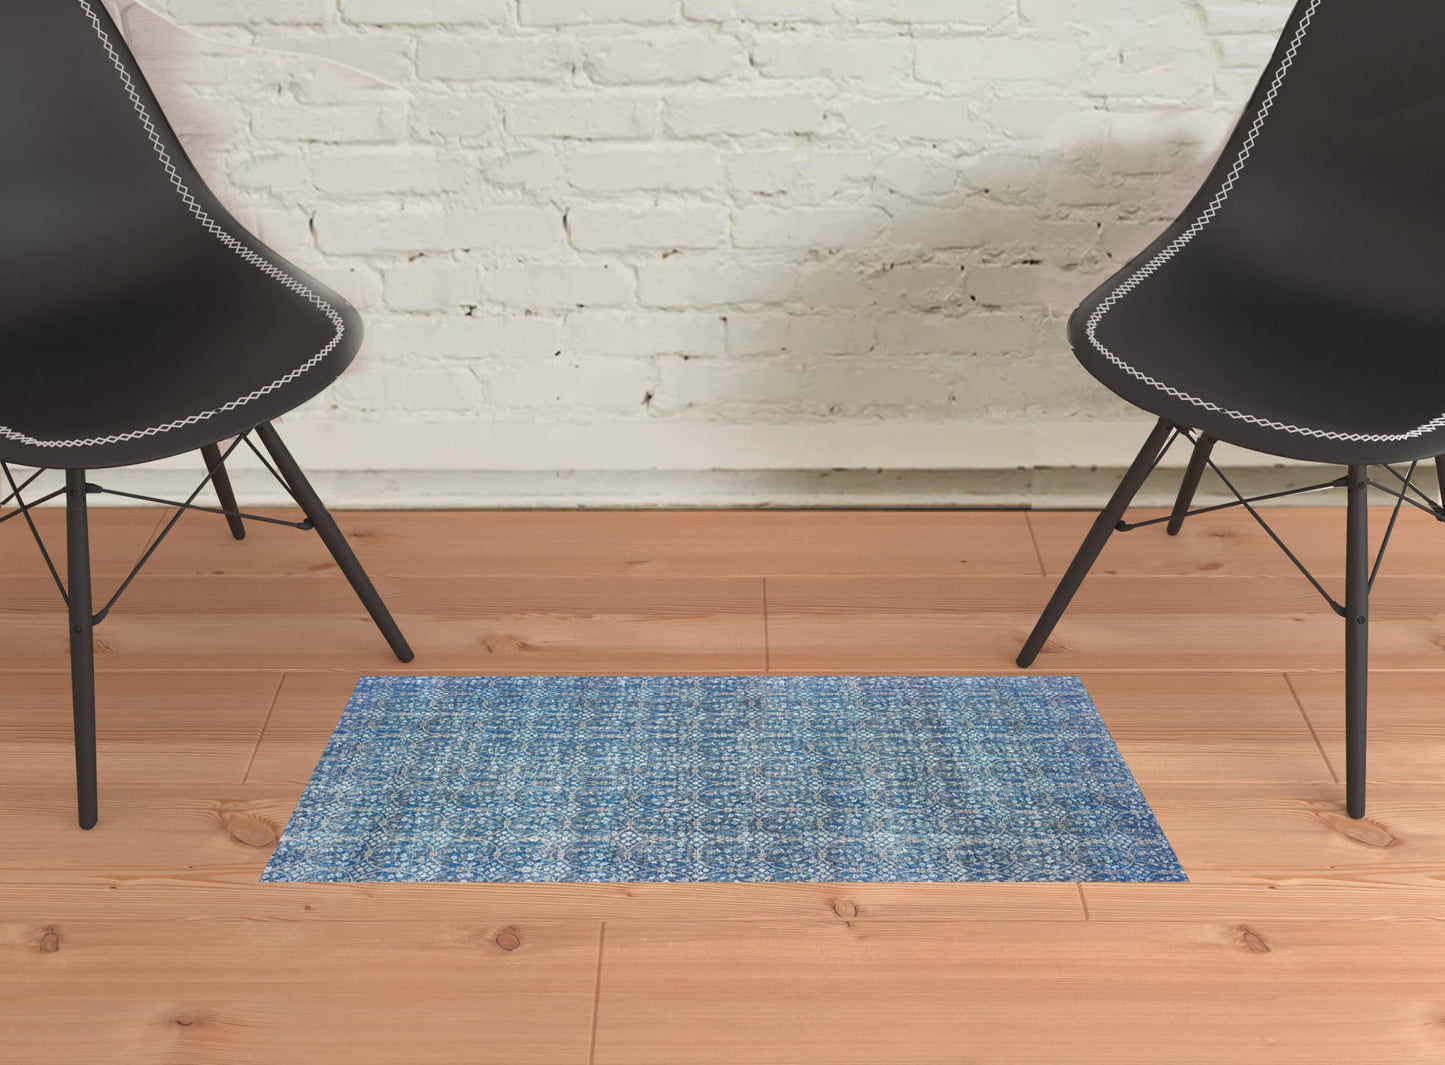 2' X 3' Blue And Brown Floral Power Loom Stain Resistant Area Rug